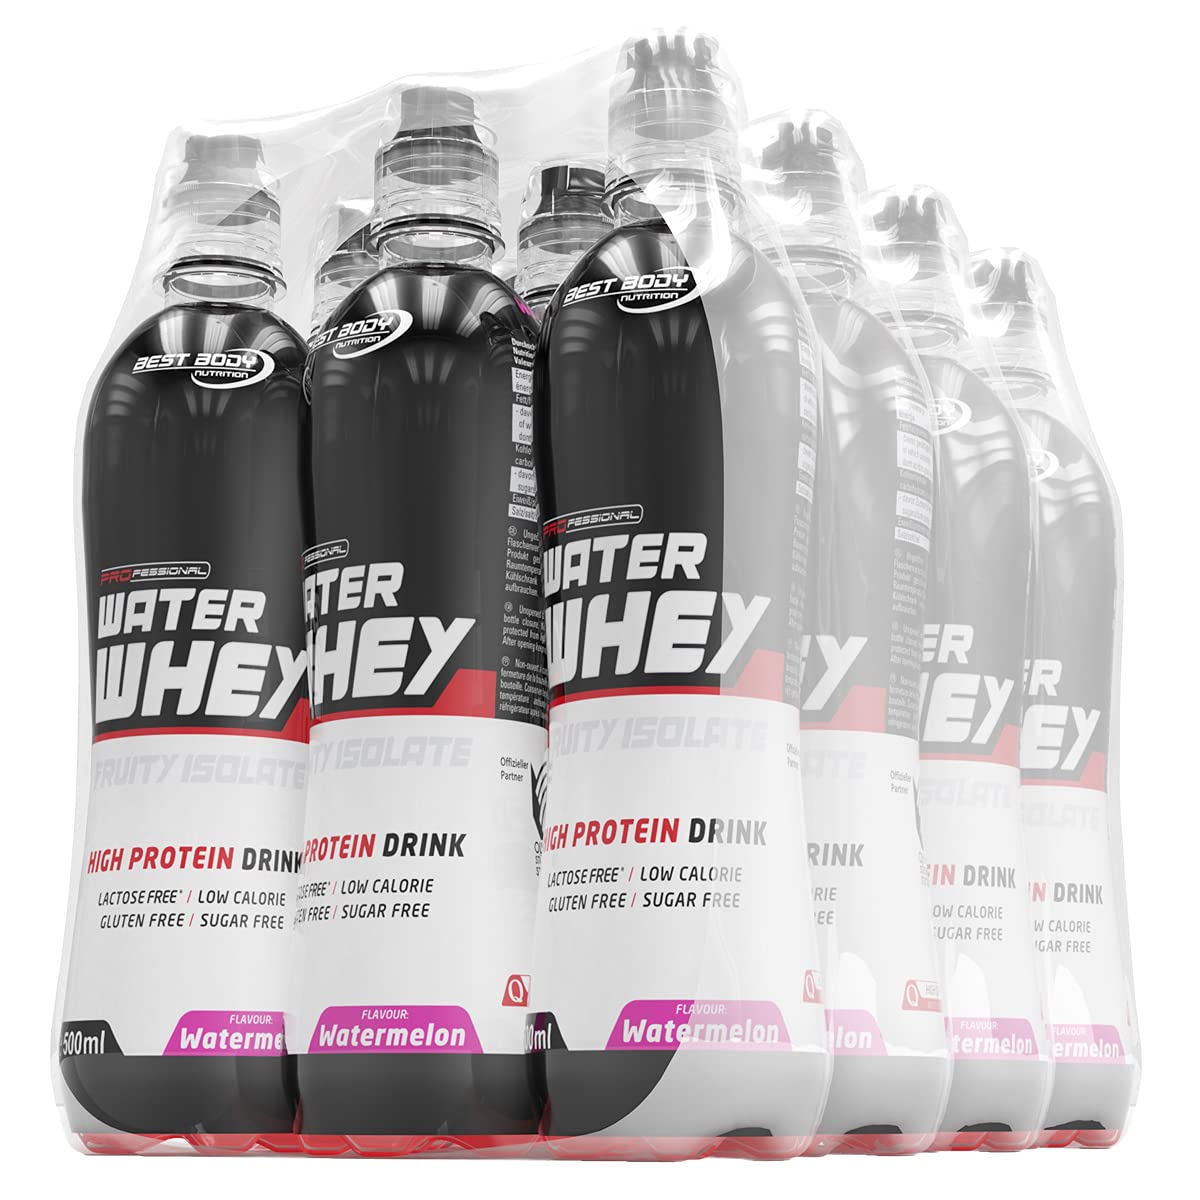 Best Body Nutrition Water Whey Isolate Drink - RTD - Watermelon - Tray